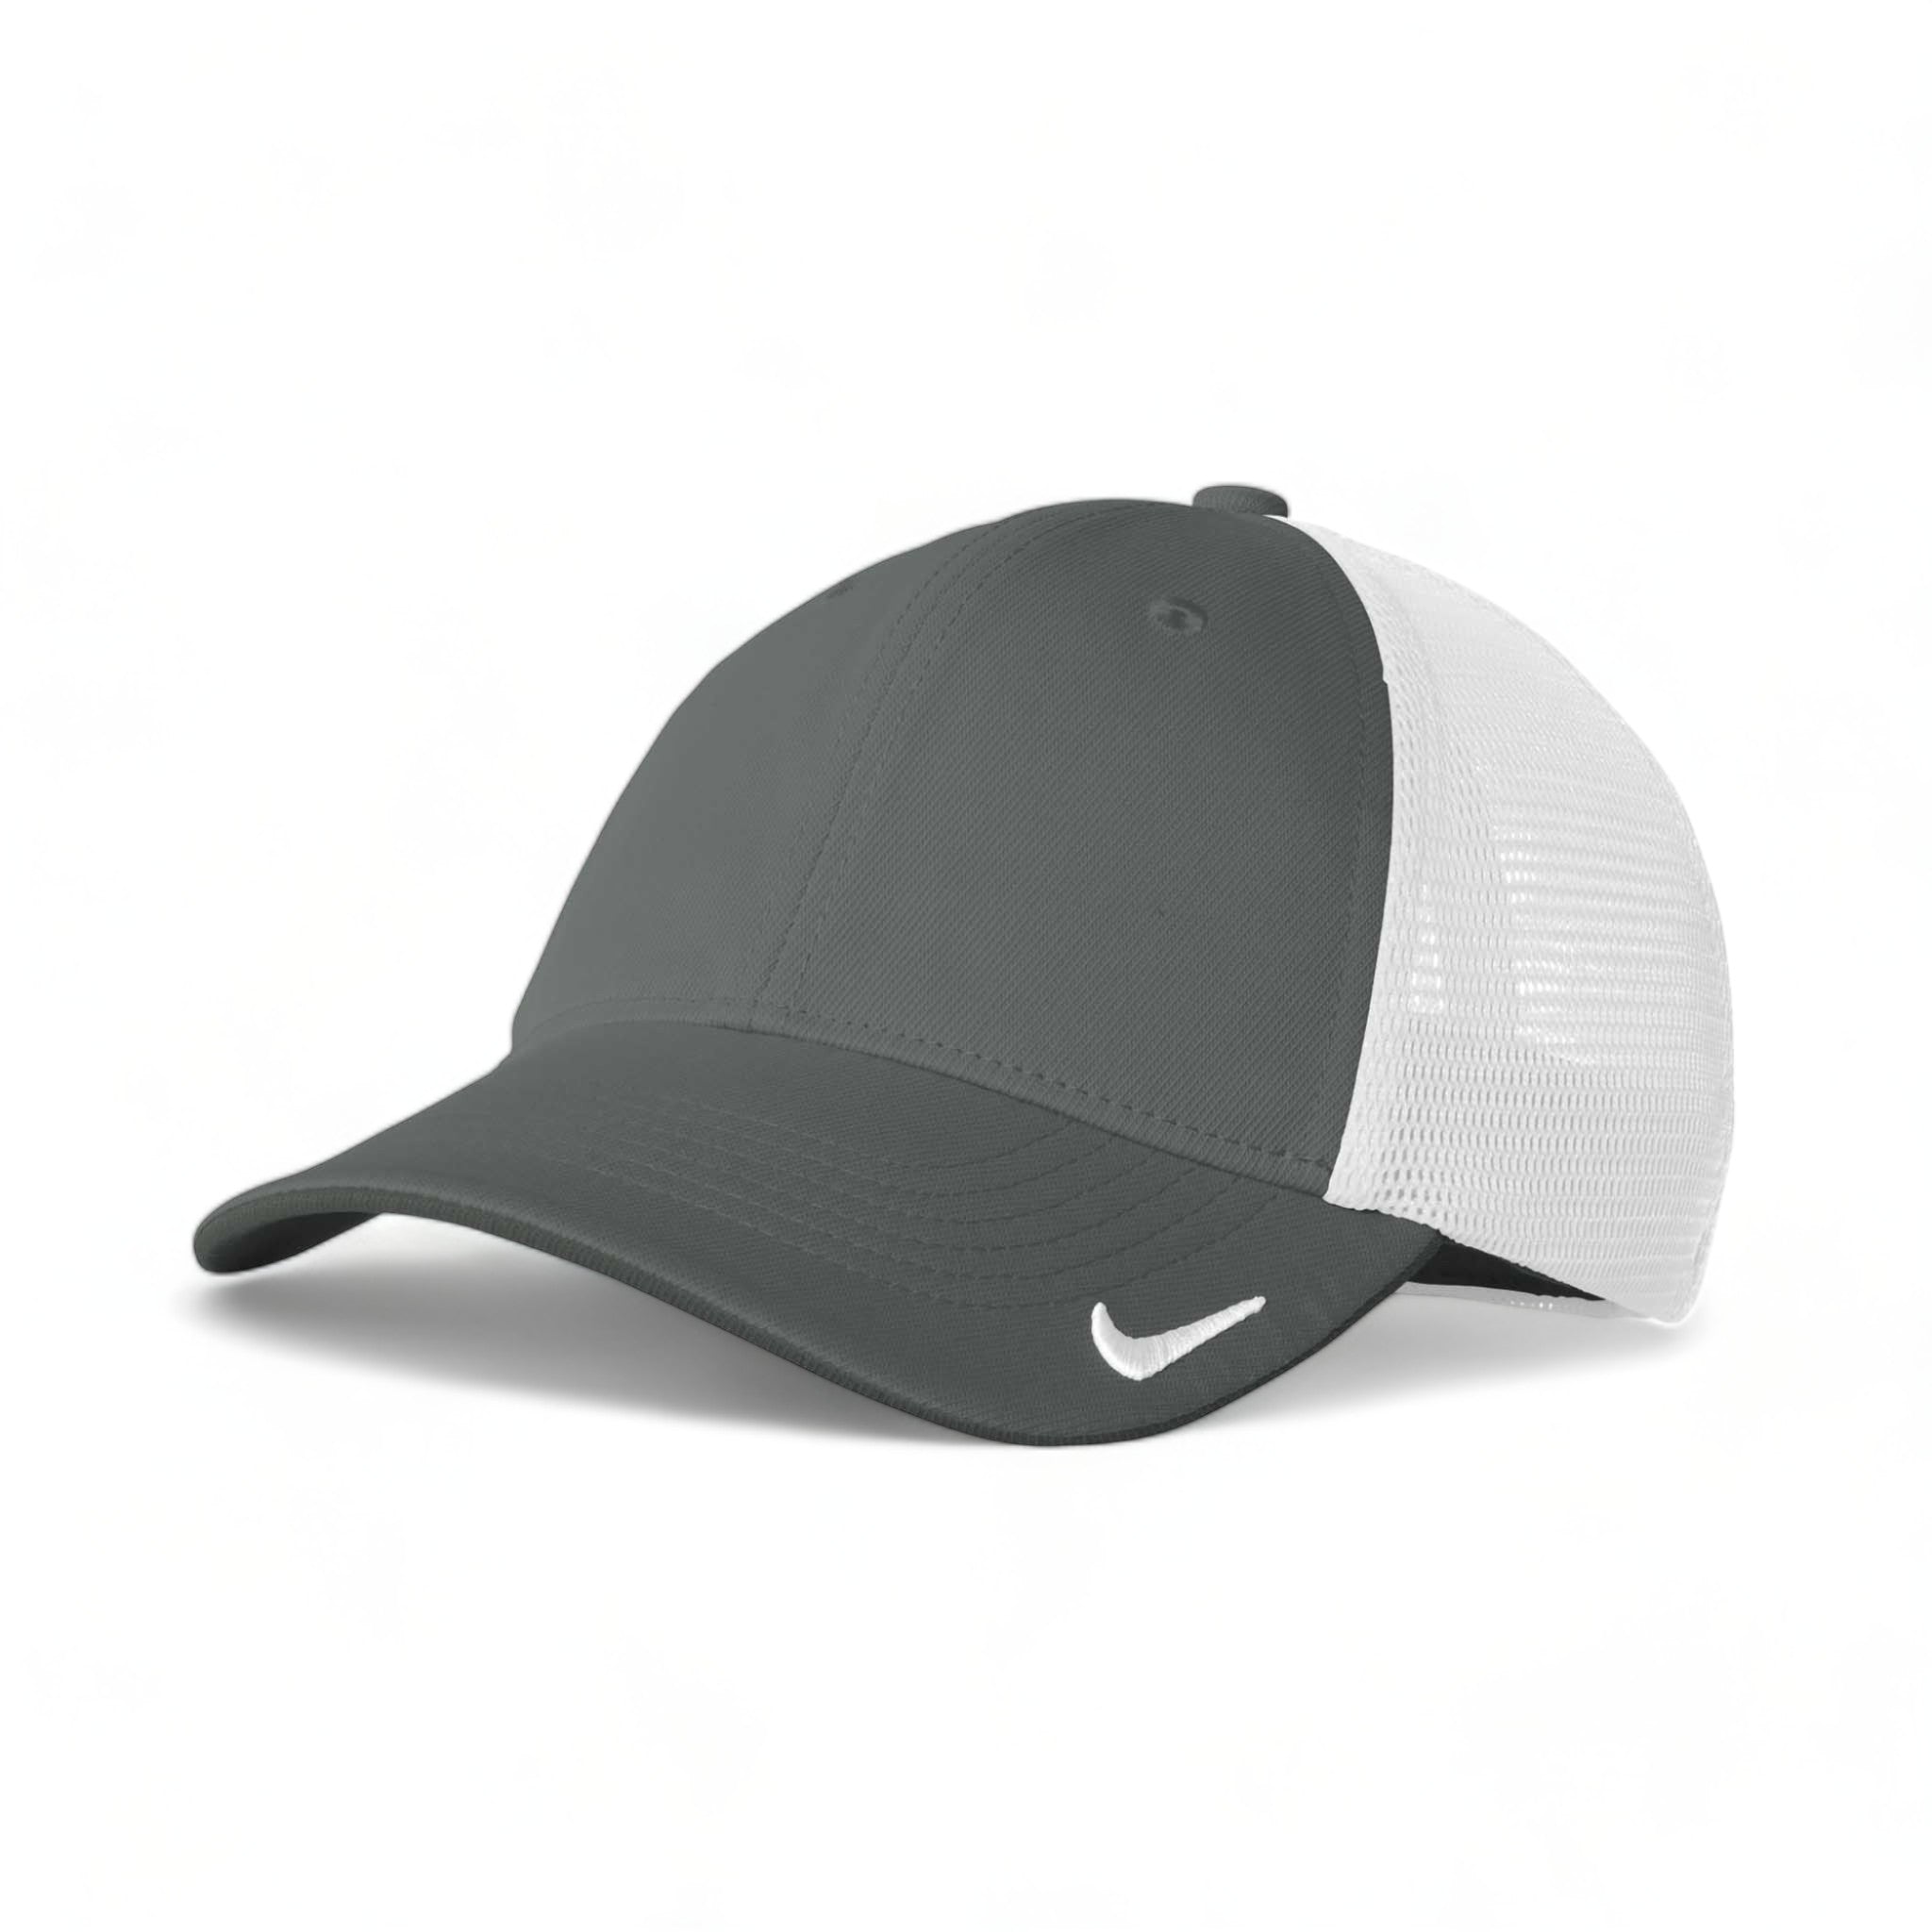 Side view of Nike NKFB6448 custom hat in anthracite and white